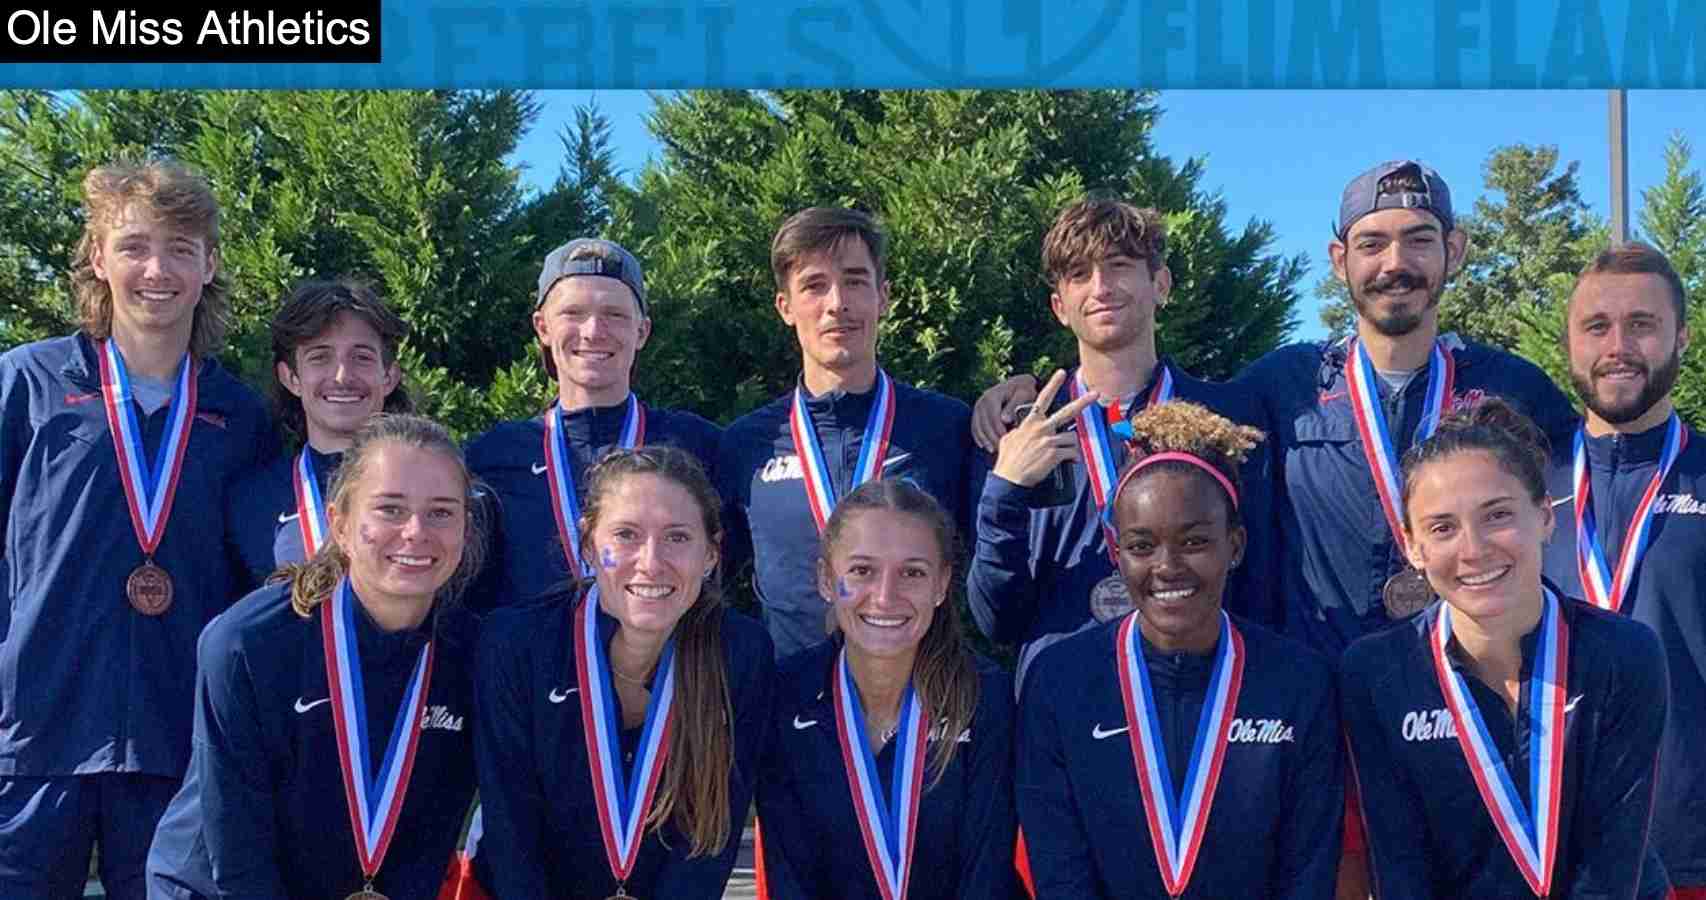 Ole Miss sweeps NCAA cross country South Region titles